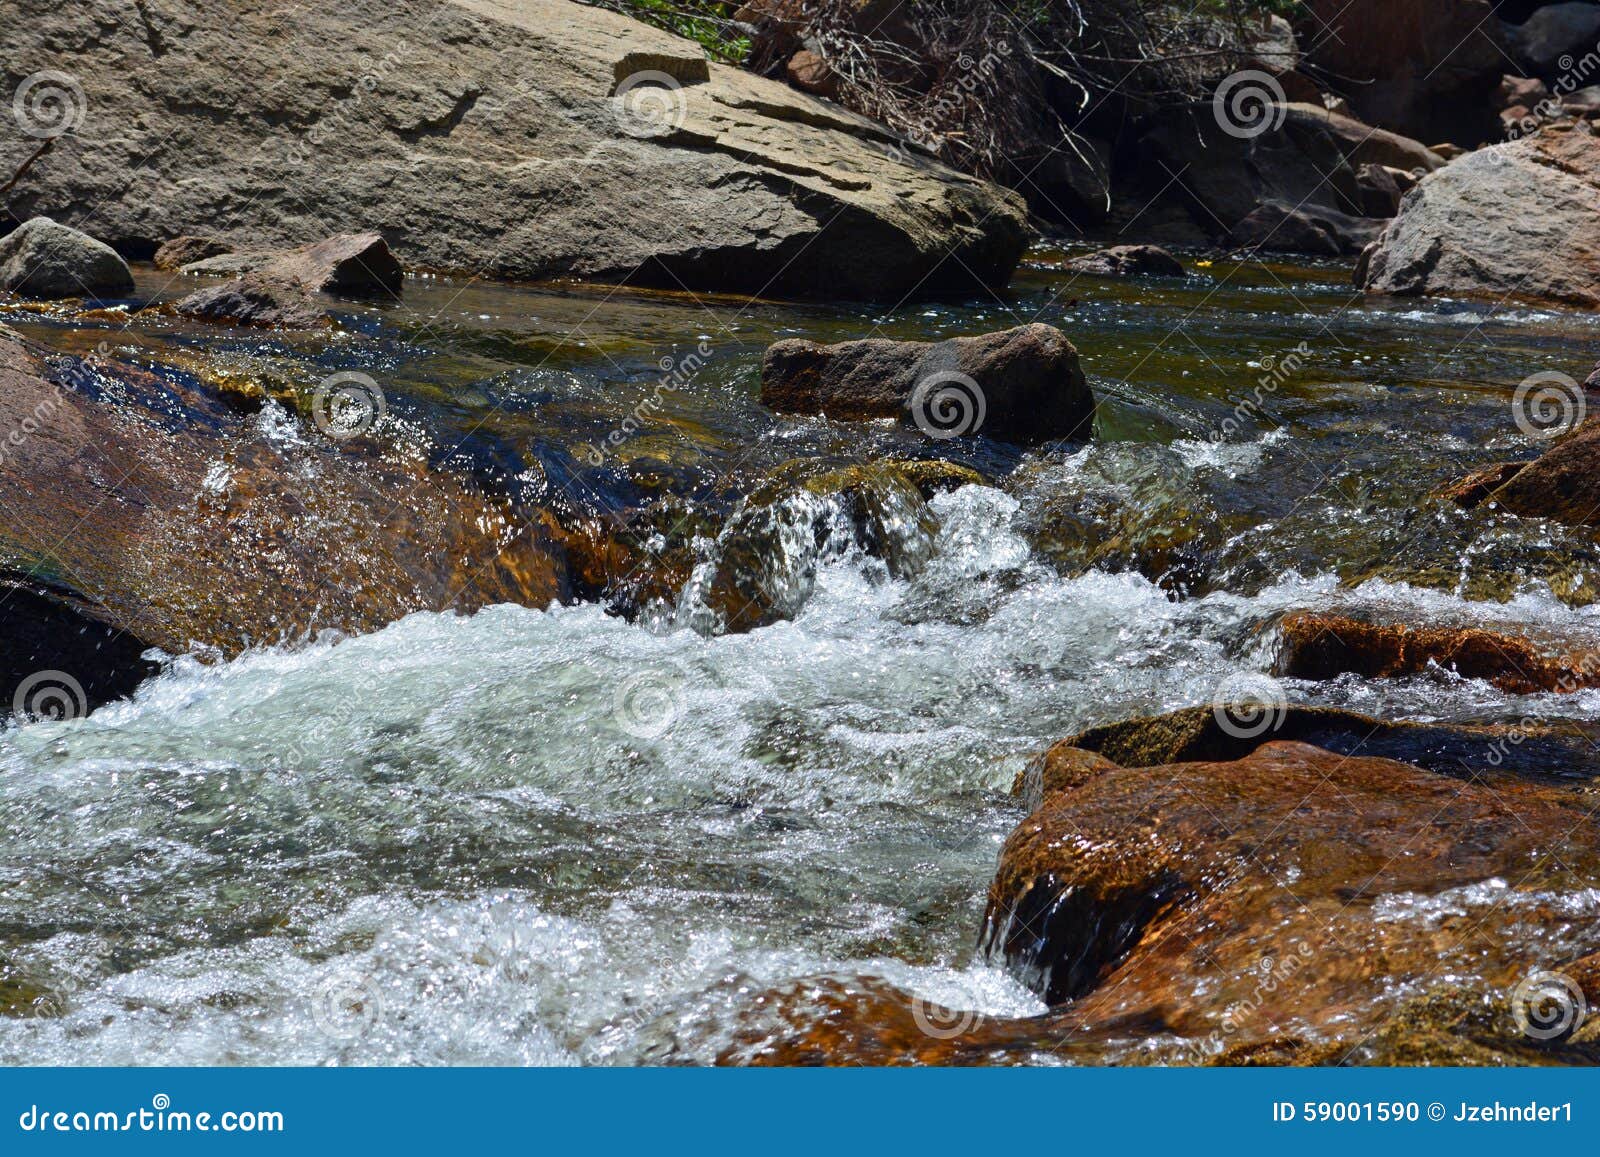 Stream Water Flows By Big Rocks. Water flows over rocks with big boulders in the background.